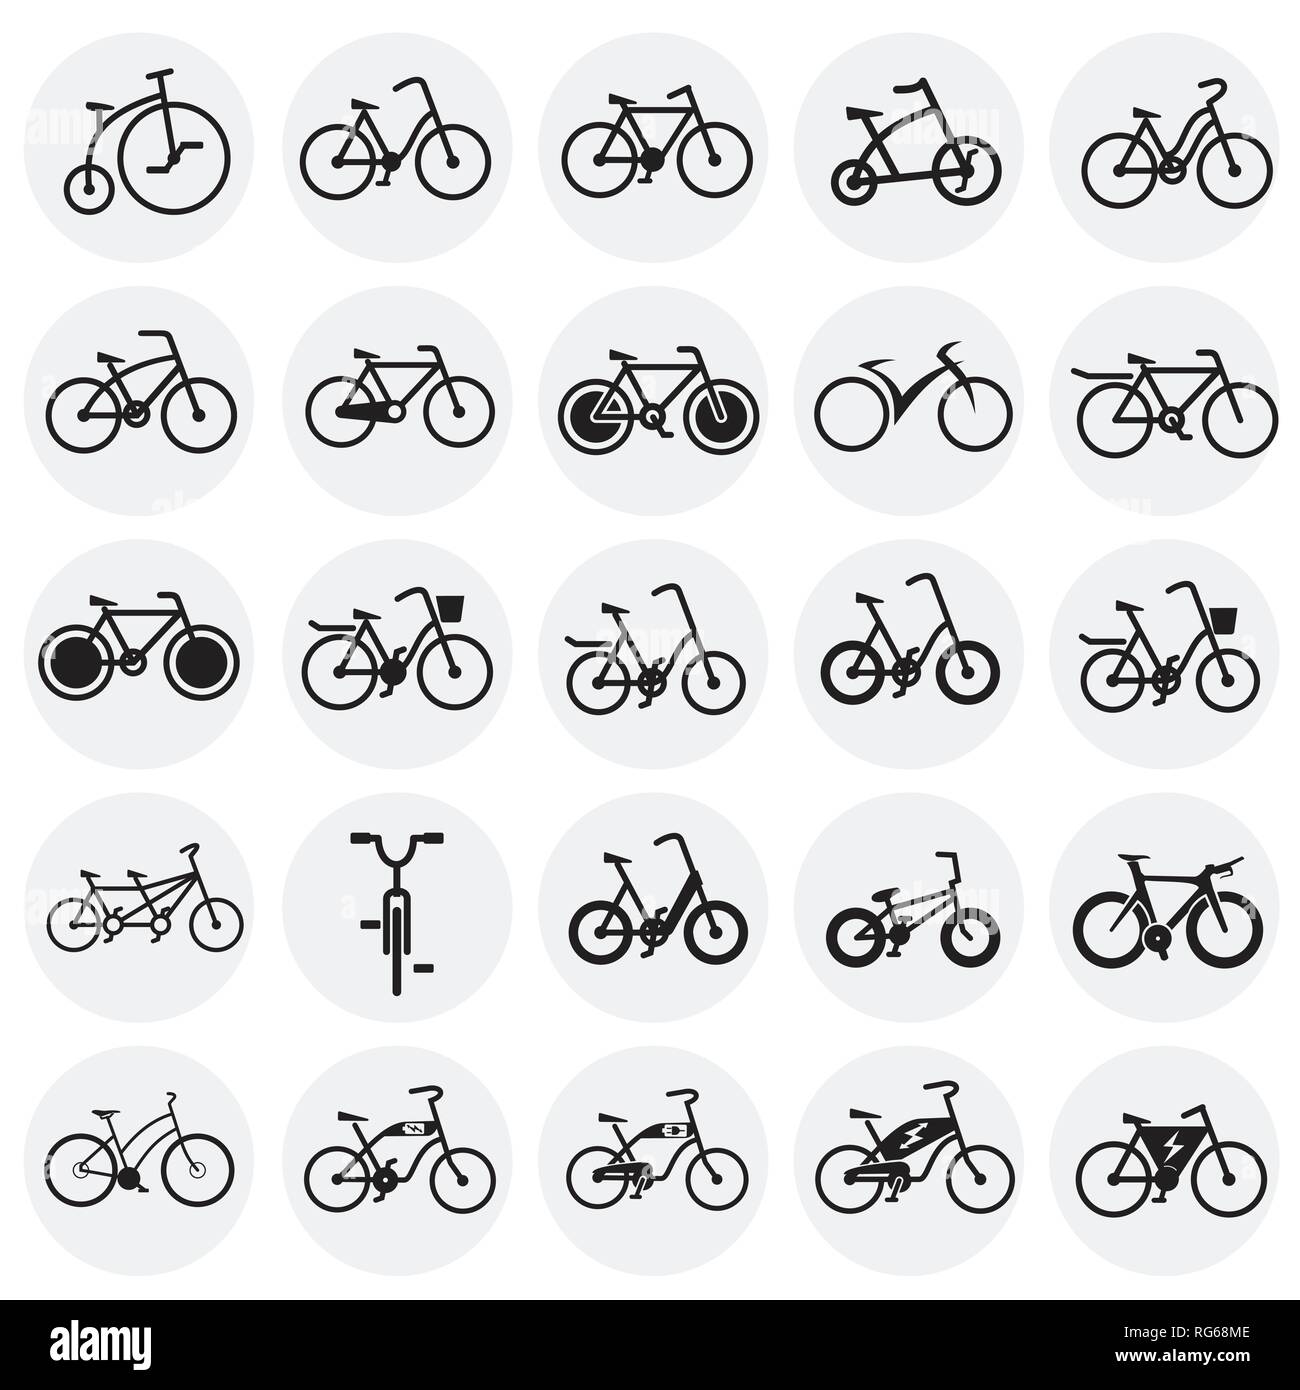 Bicycle Icons Set On Circles White Background For Graphic And Web